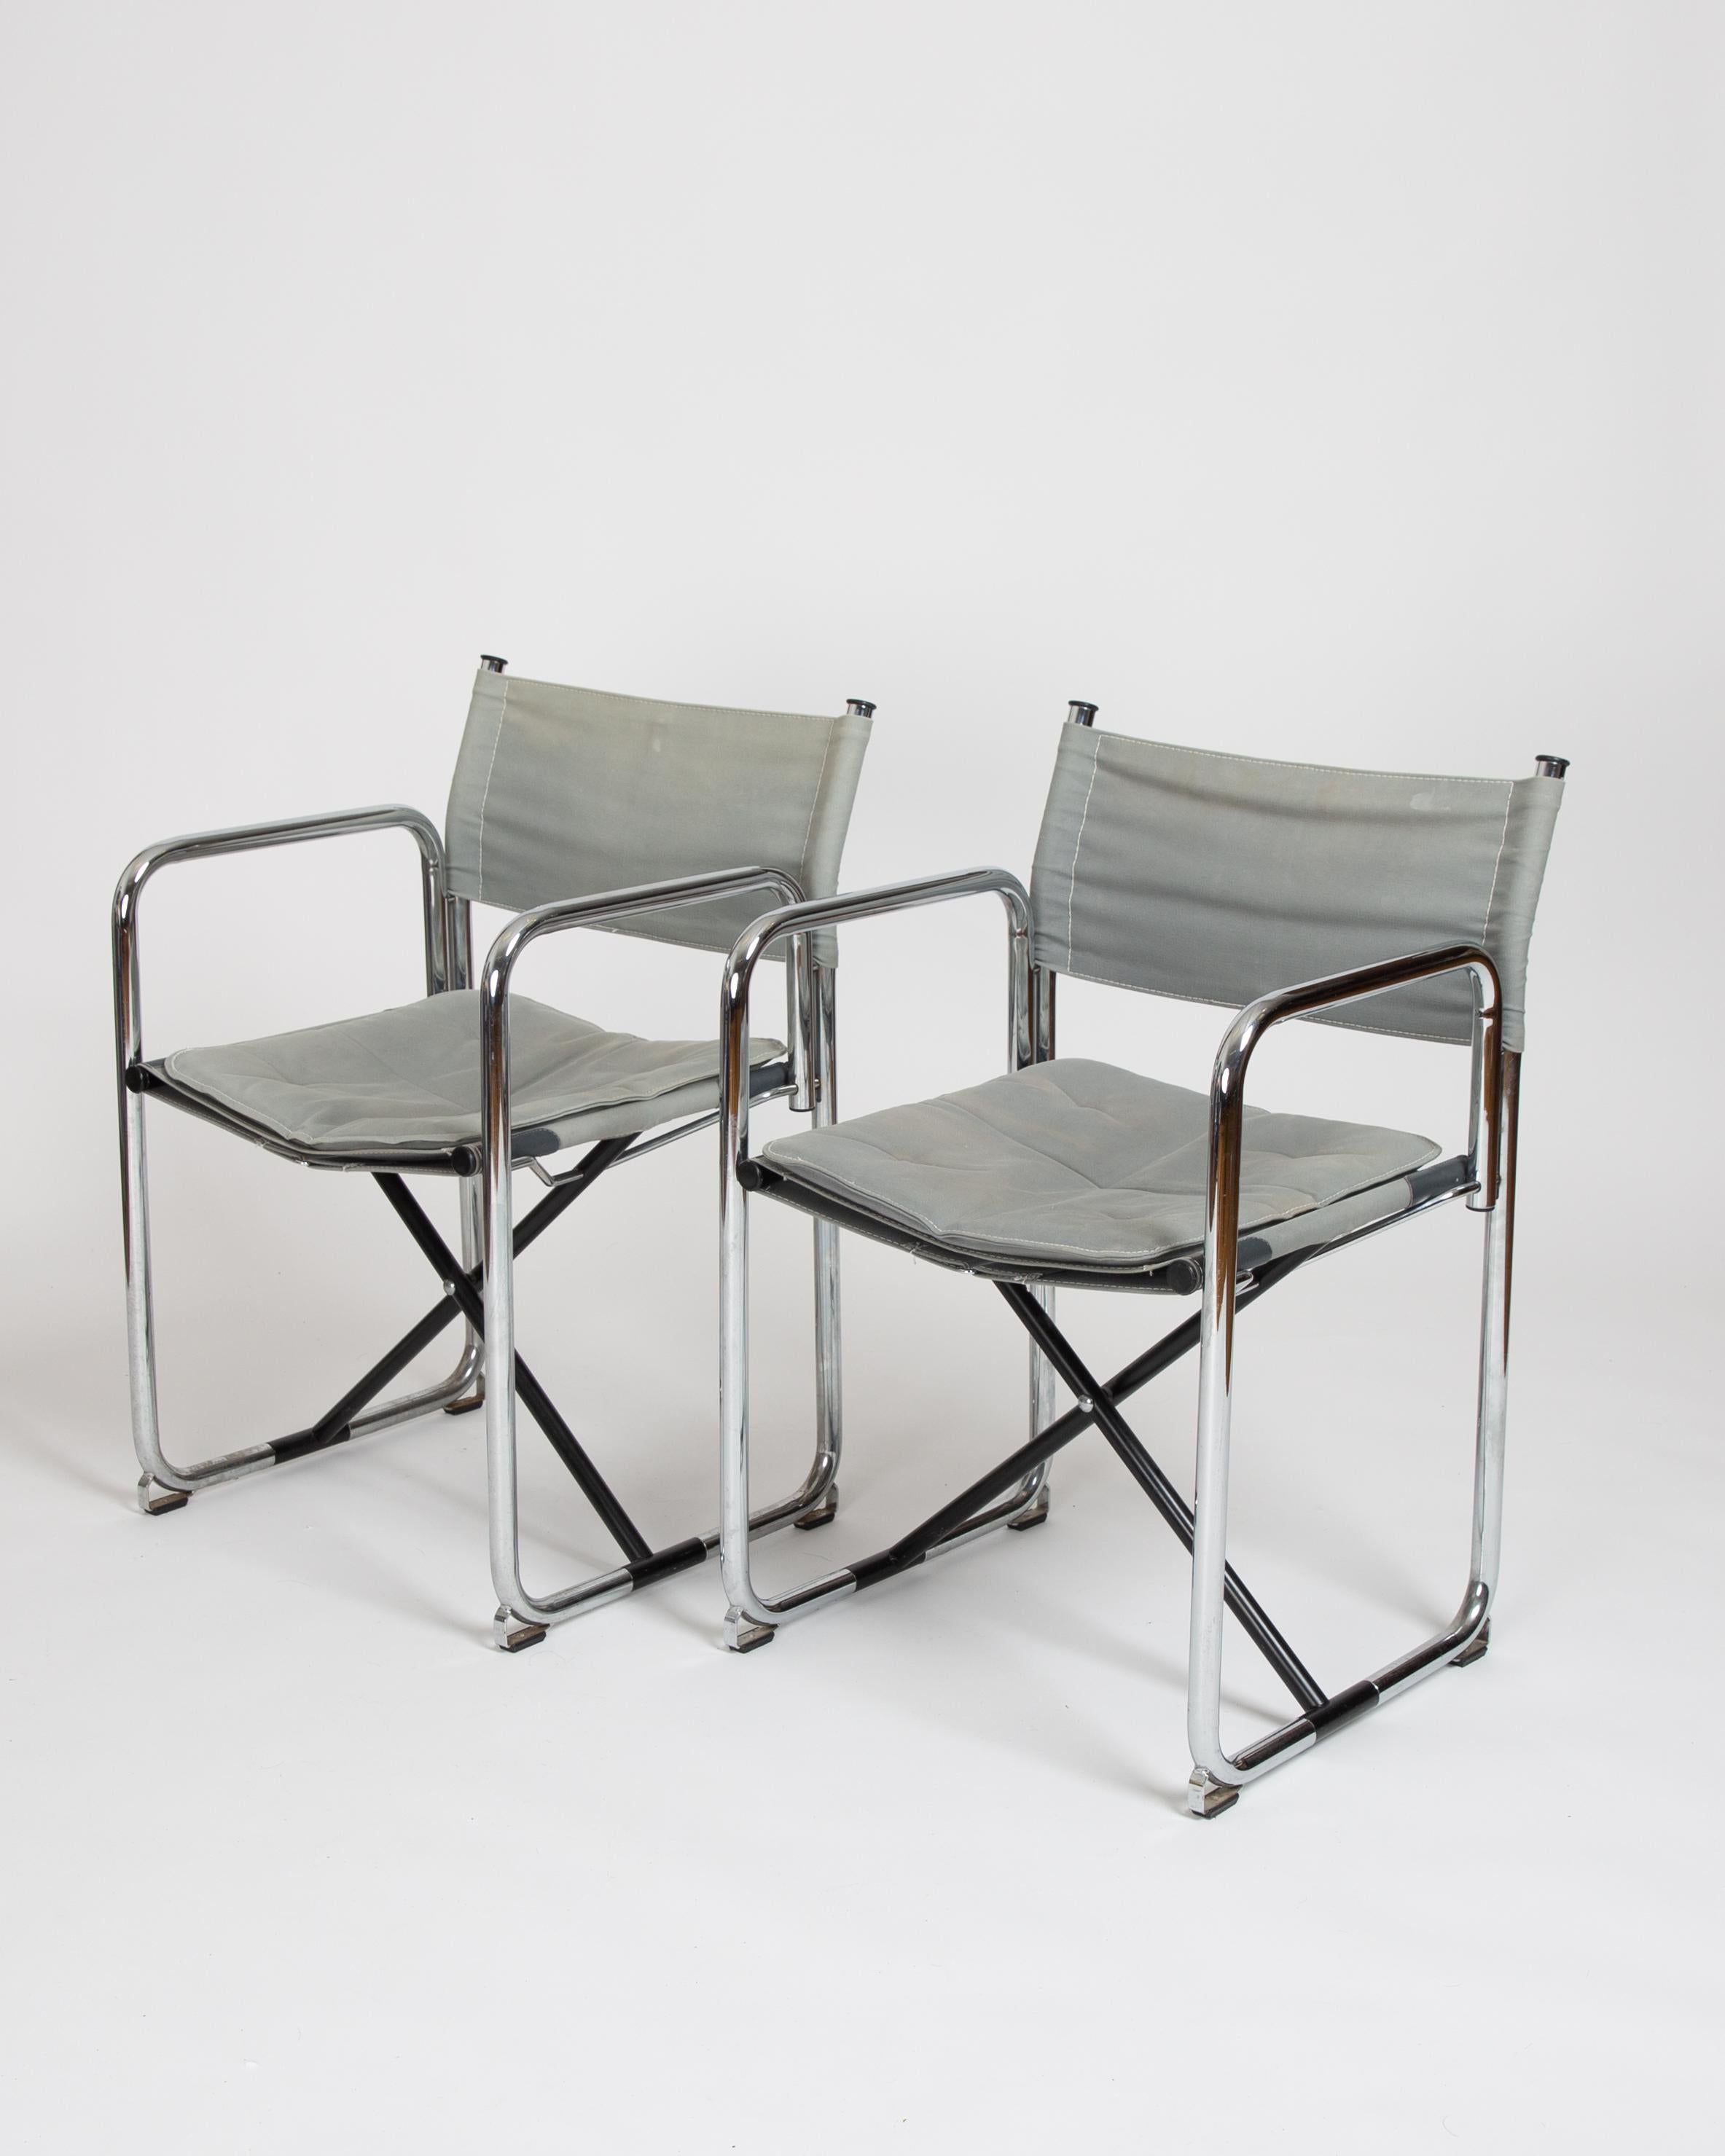 A pair of perfectly faded X75-2 chairs. One of the most compelling foldable chair ever made. Tubular steel and canvas make up this iconic director chair. The ‘X’ denotes the cross beneath the seat in the middle of the chair. Most director chairs